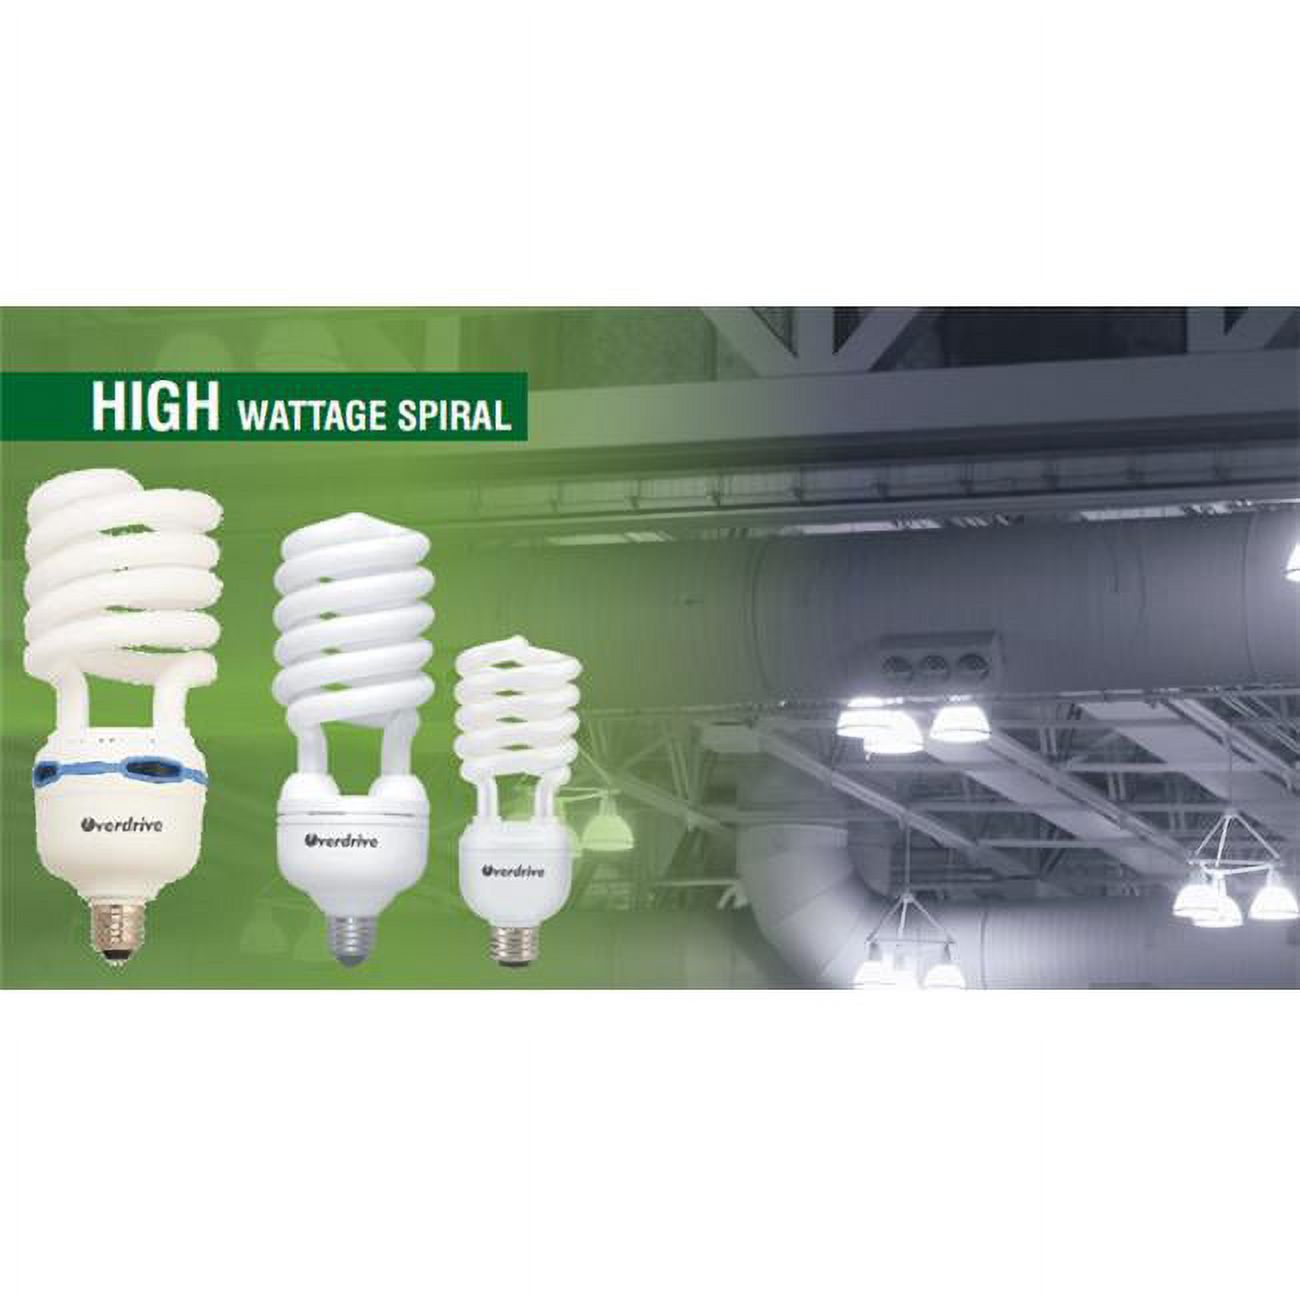 Overdrive 23W Super Mini Spiral T2 CFL -2700K Soft White - Pack Of 6 - image 1 of 1